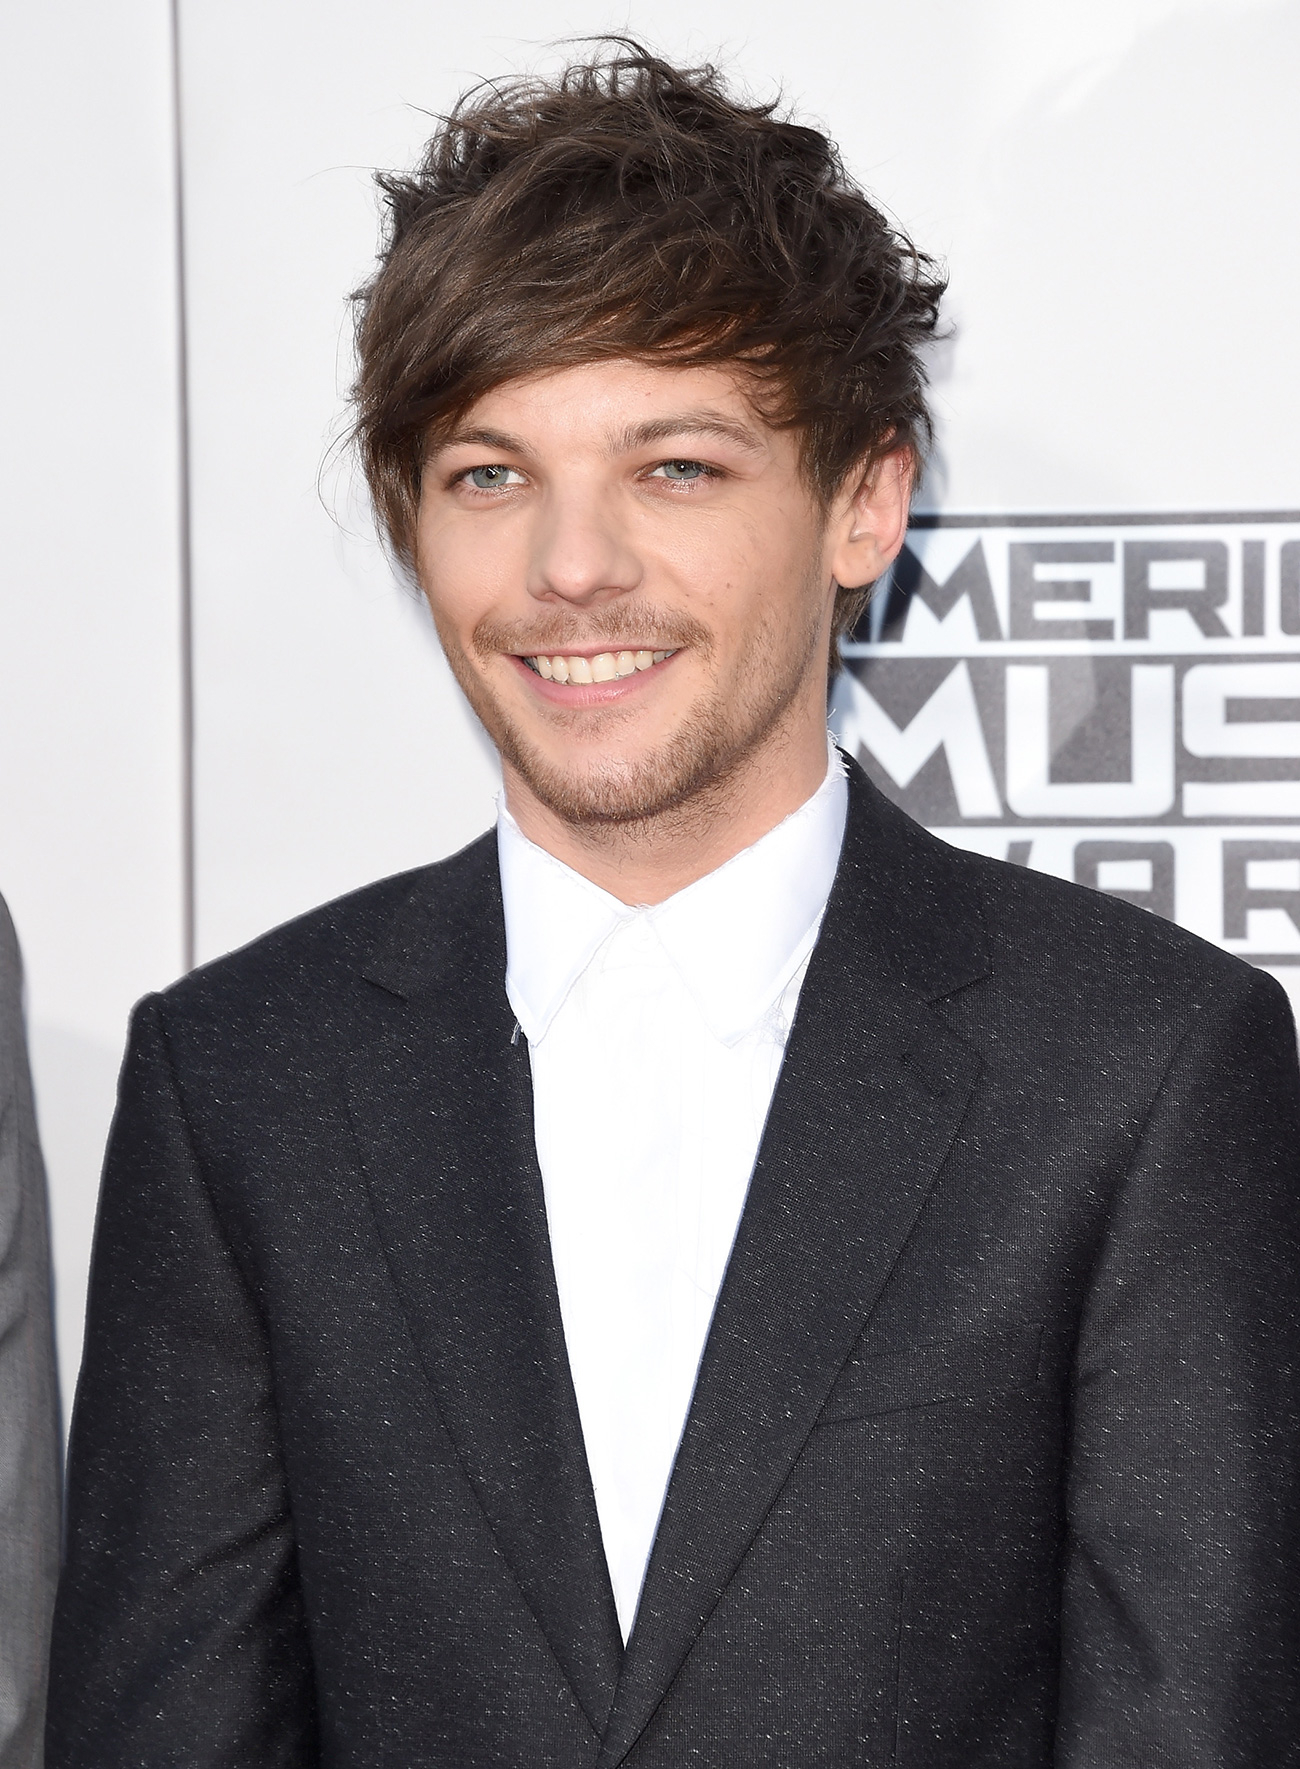 Louis Tomlinson Says He's 'Excited' to Meet His Son or Daughter – Billboard